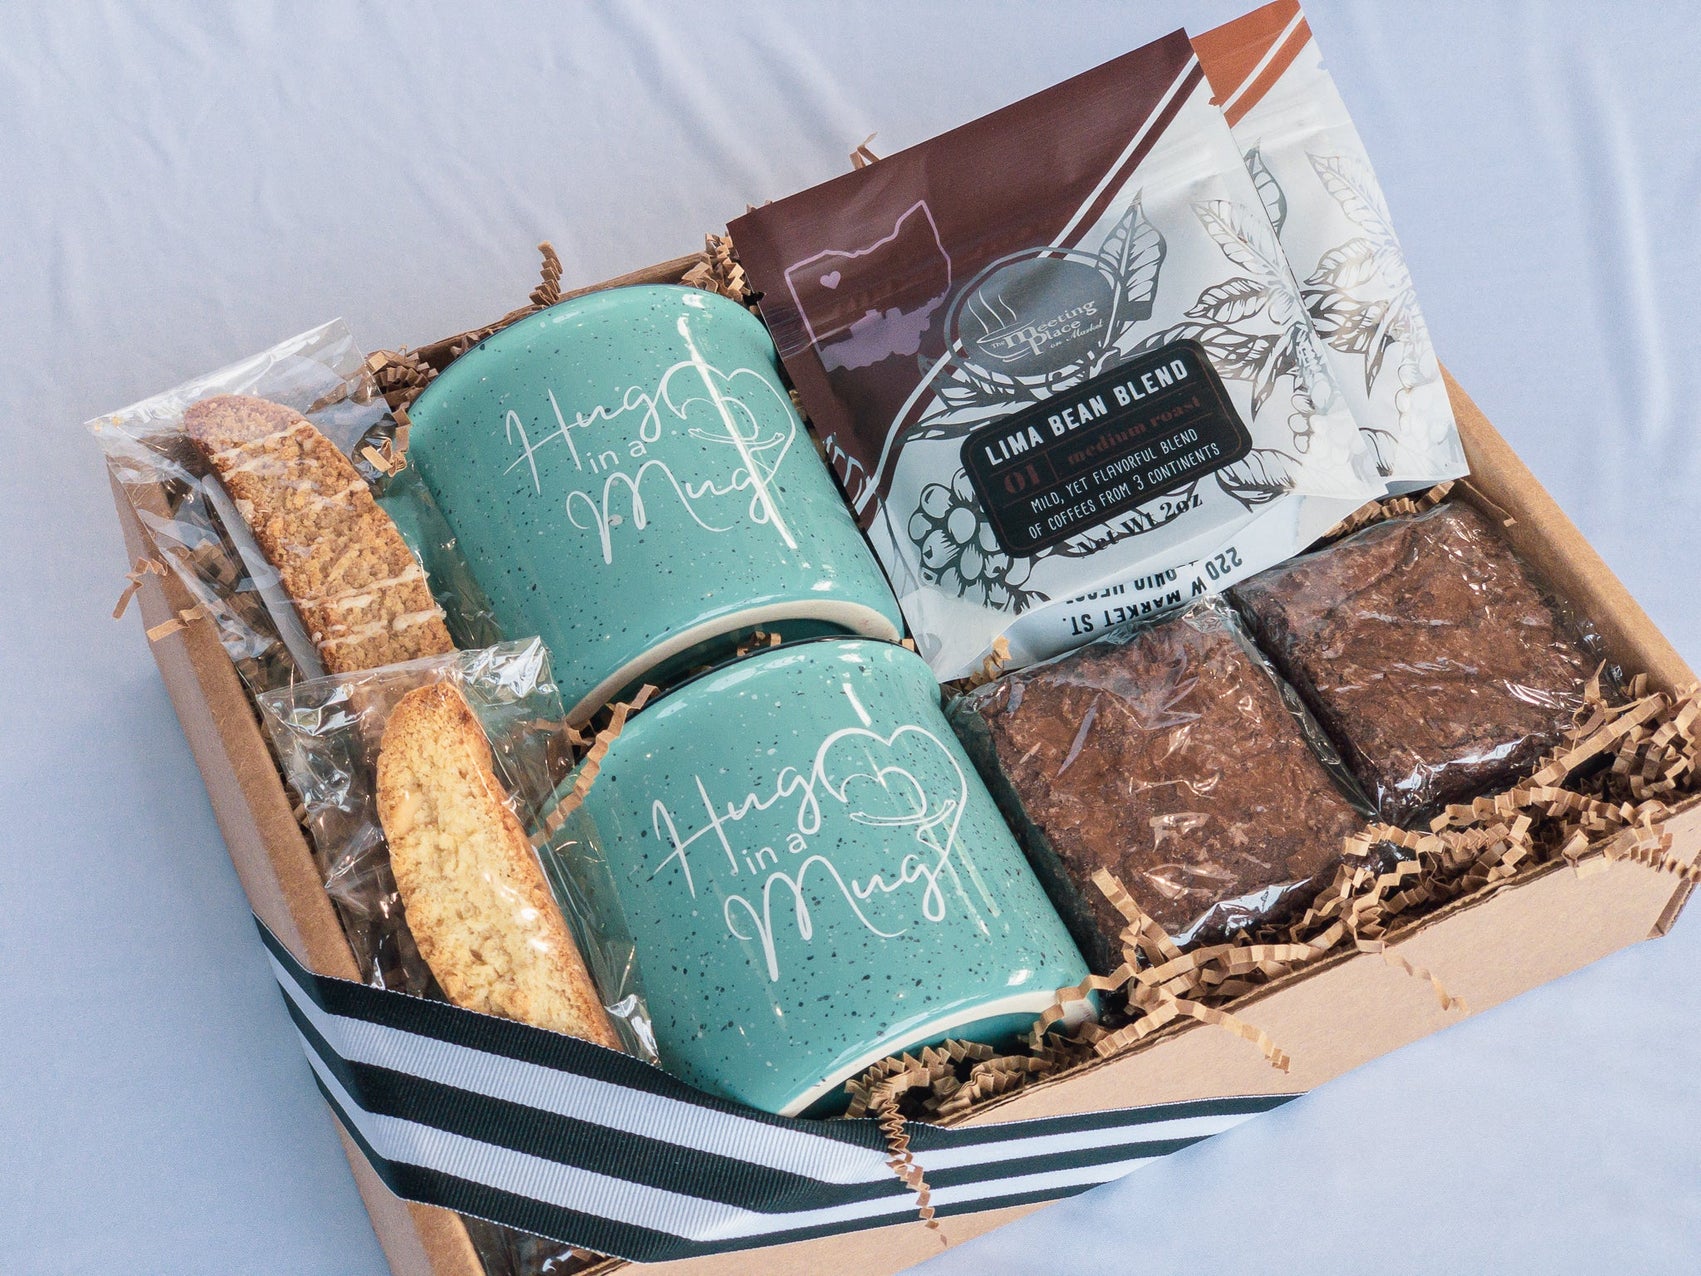 Hug in a Mug Gift Box for Two Congratulations - The Meeting Place on Market